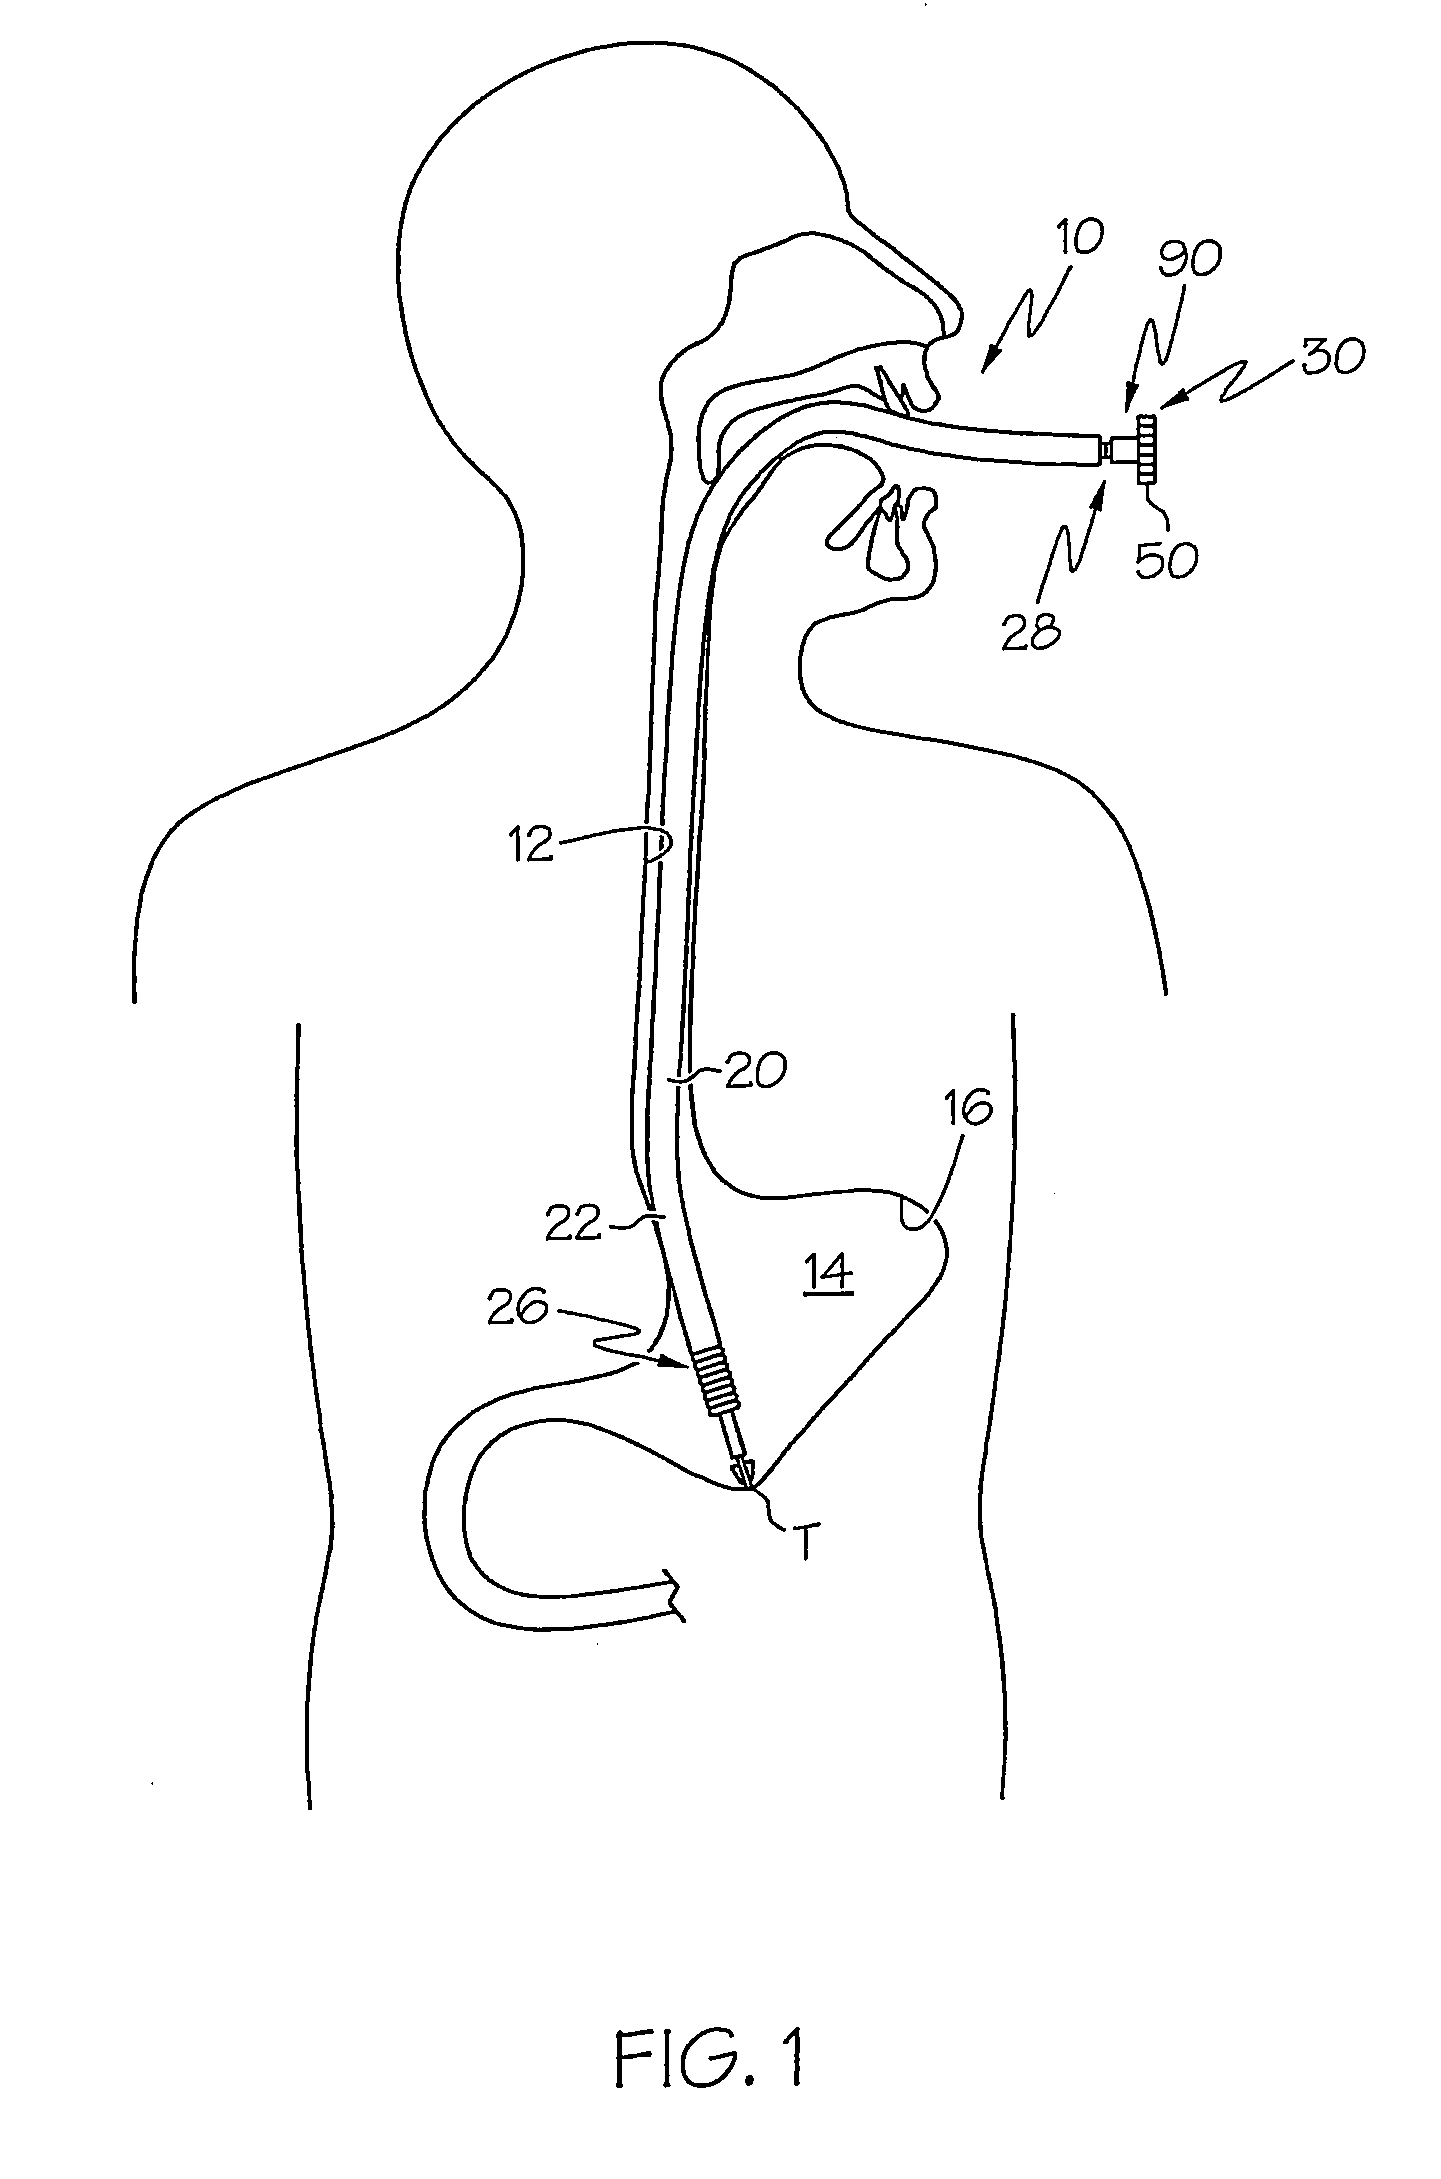 Flexible tissue-penetration instrument with blunt tip assembly and methods for penetrating tissue